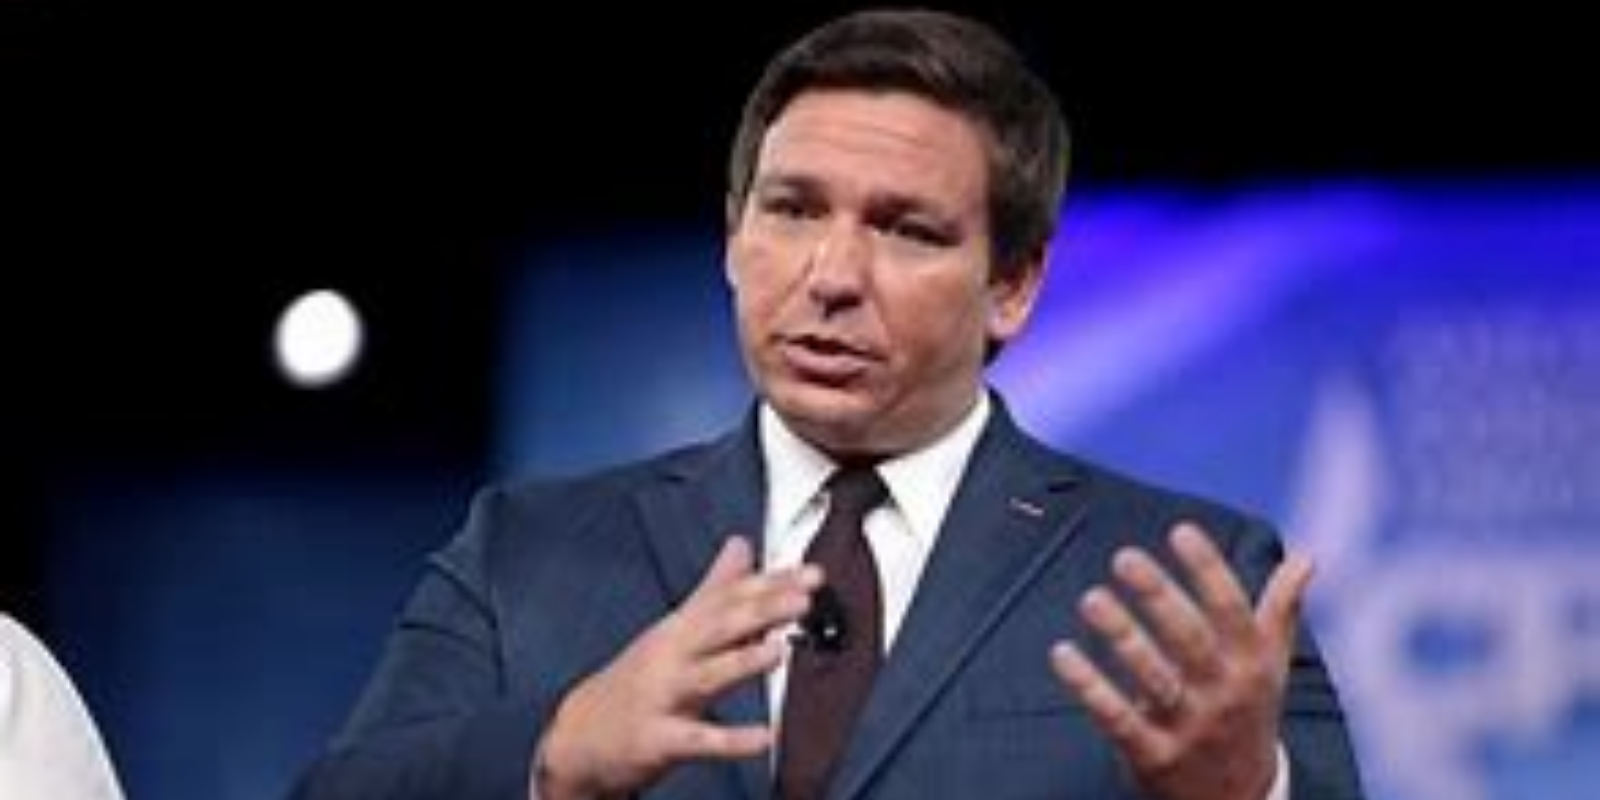 DeSantis faces legal challenge, pushback from 'experts' on his mask mandate ban